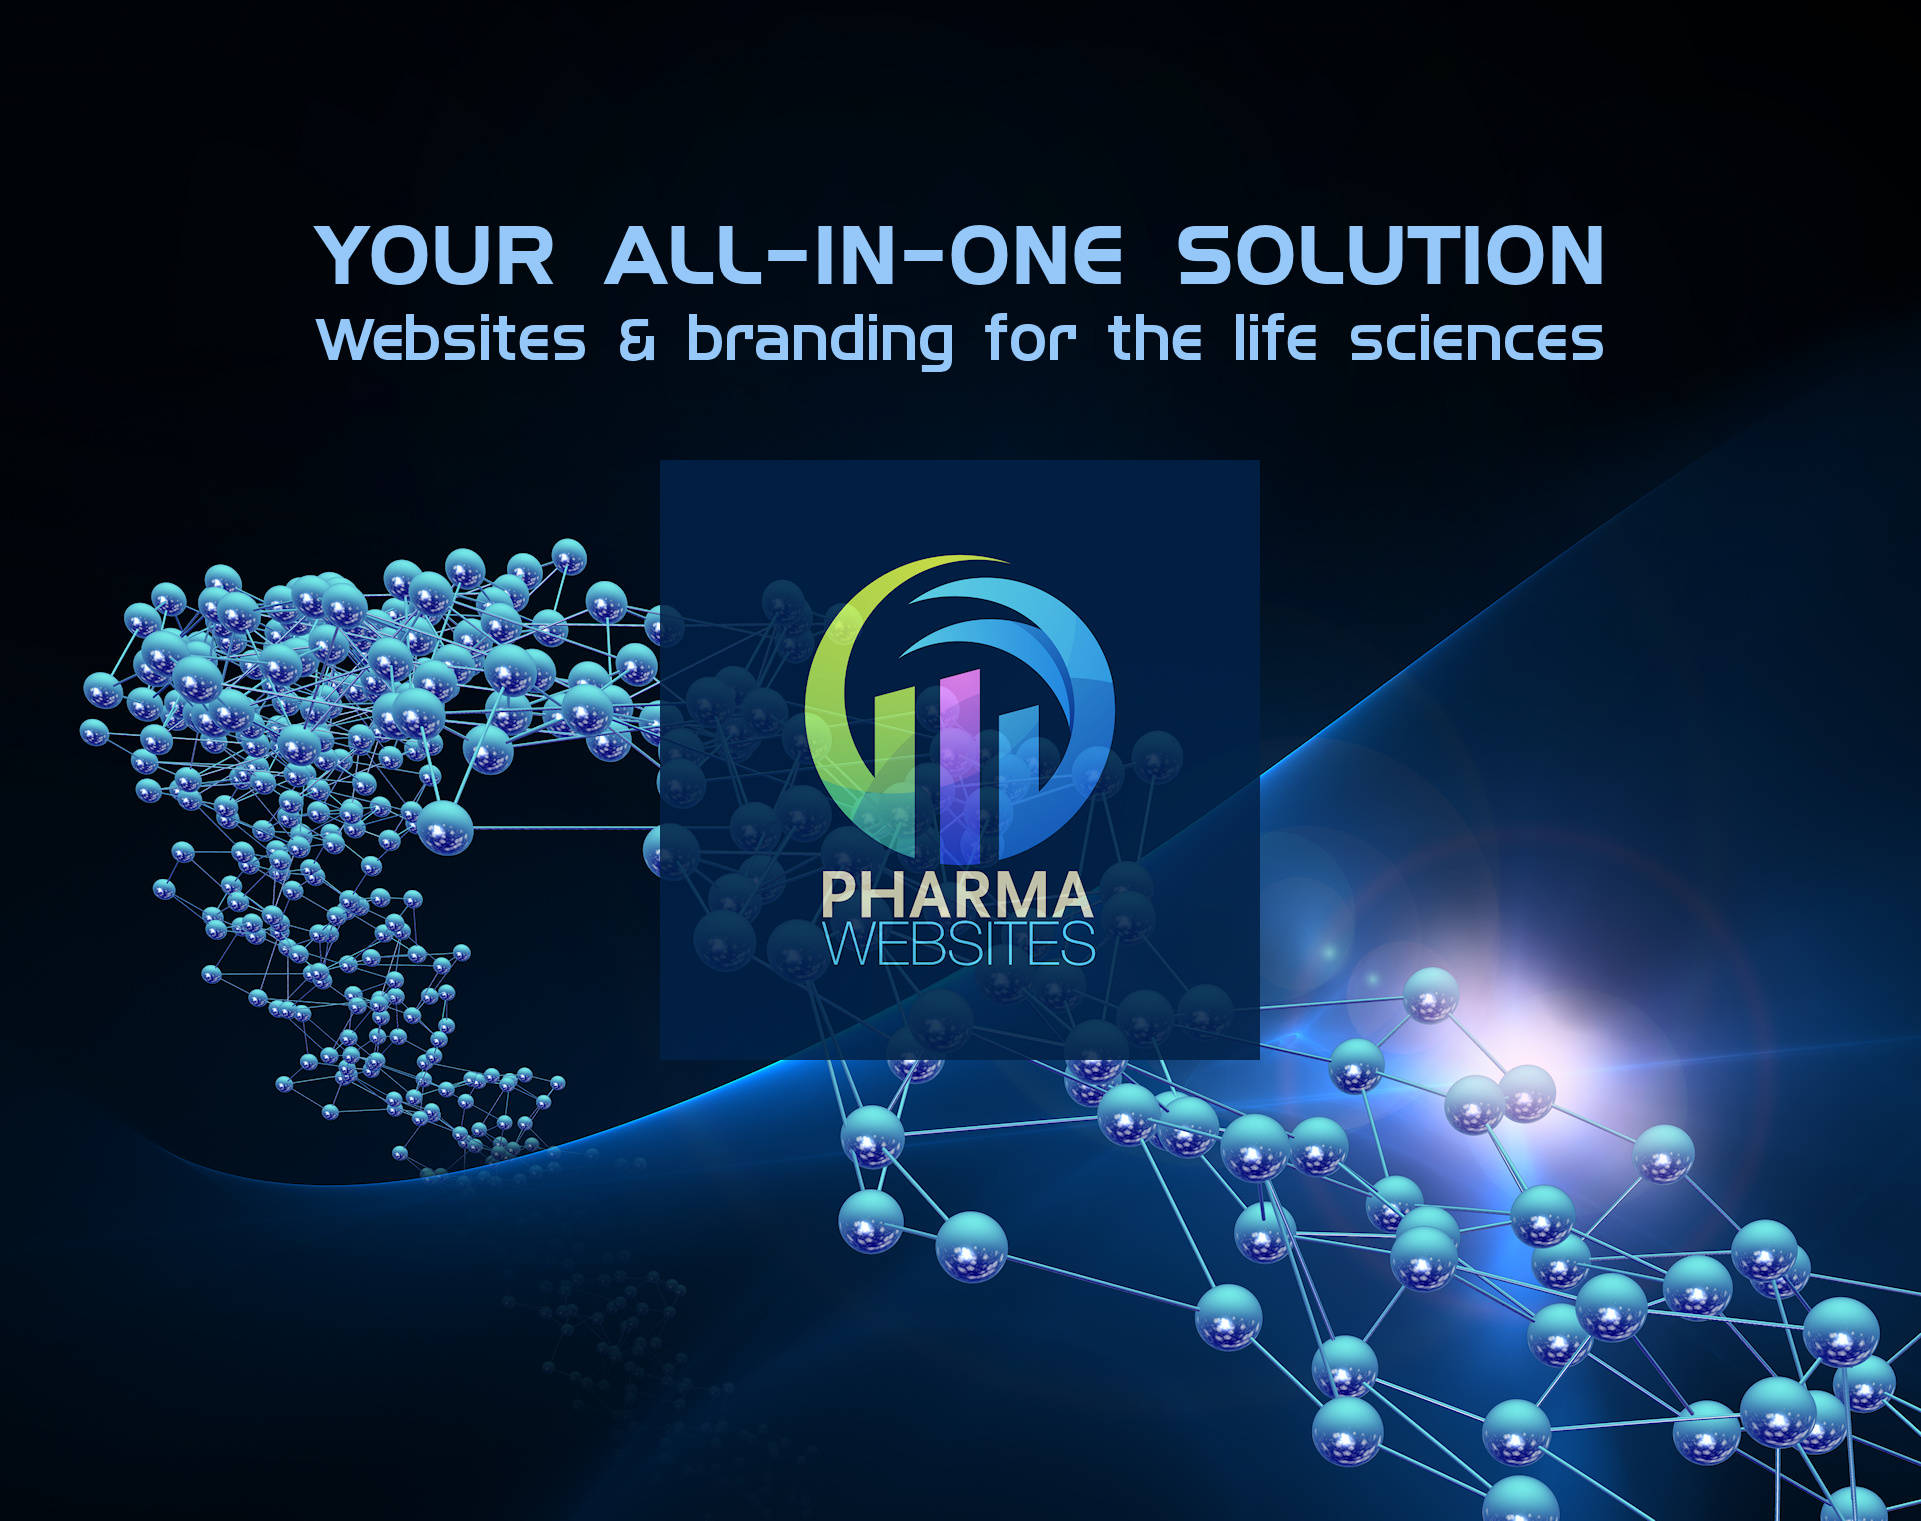 Your all-in-one solution: Websites & branding for the life sciences